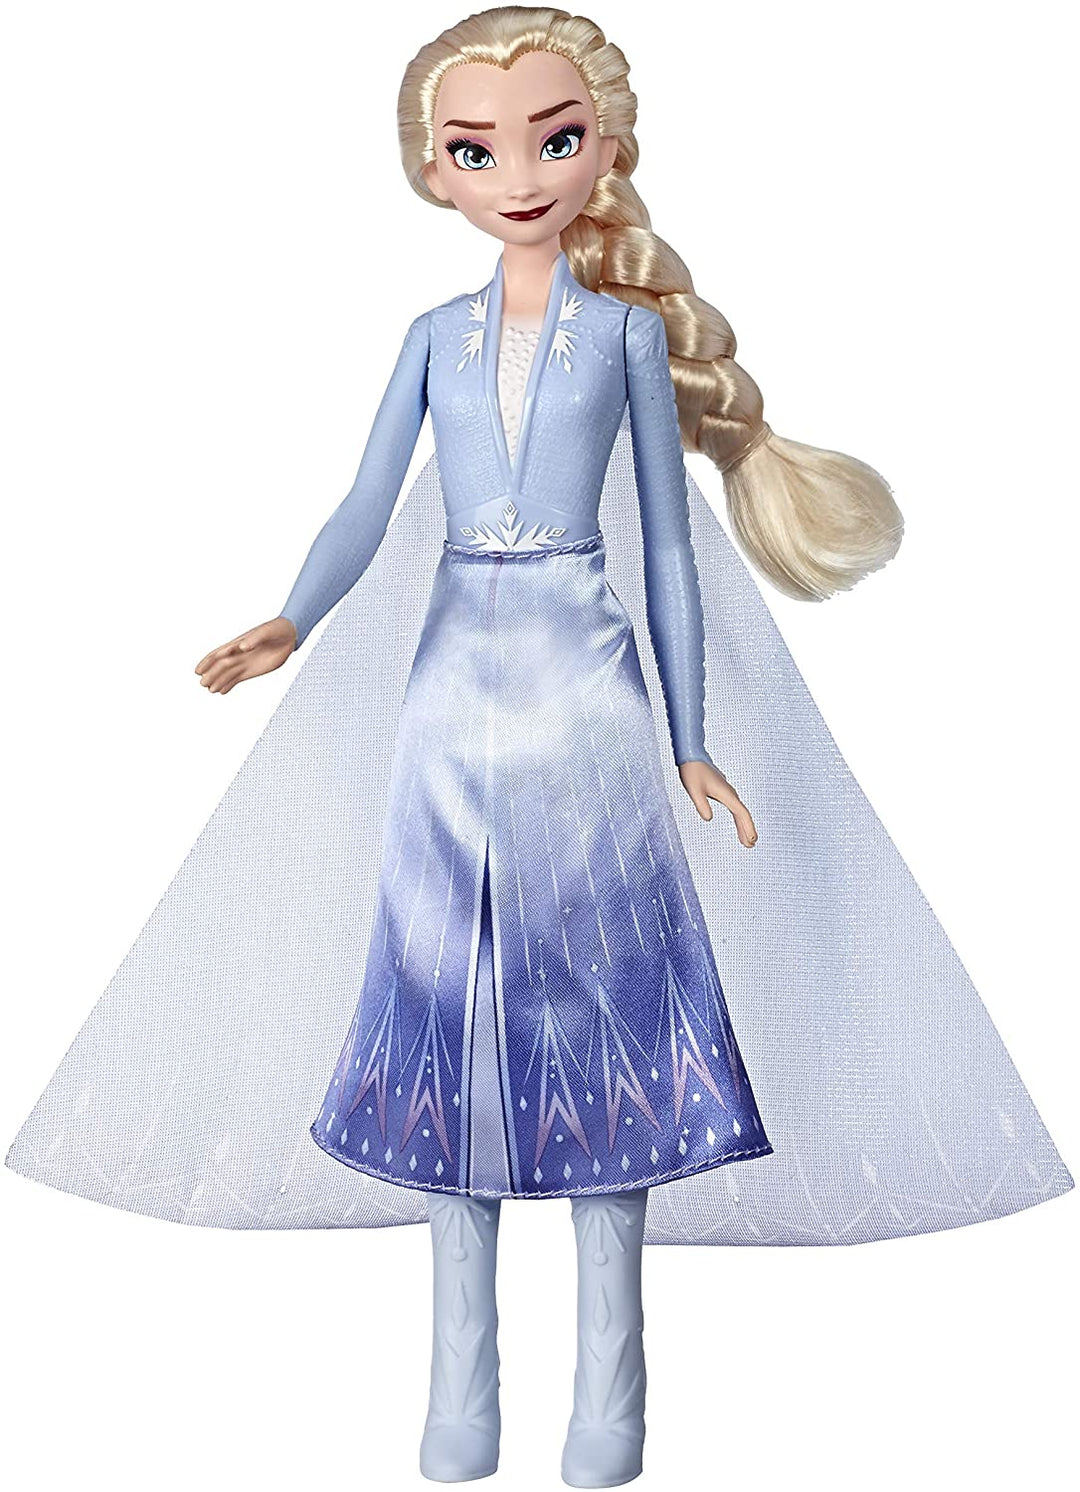 Disney Frozen Elsa Magical Swirling Adventure Fashion Doll That Lights Up, Inspired by Disney's Frozen 2 Movie